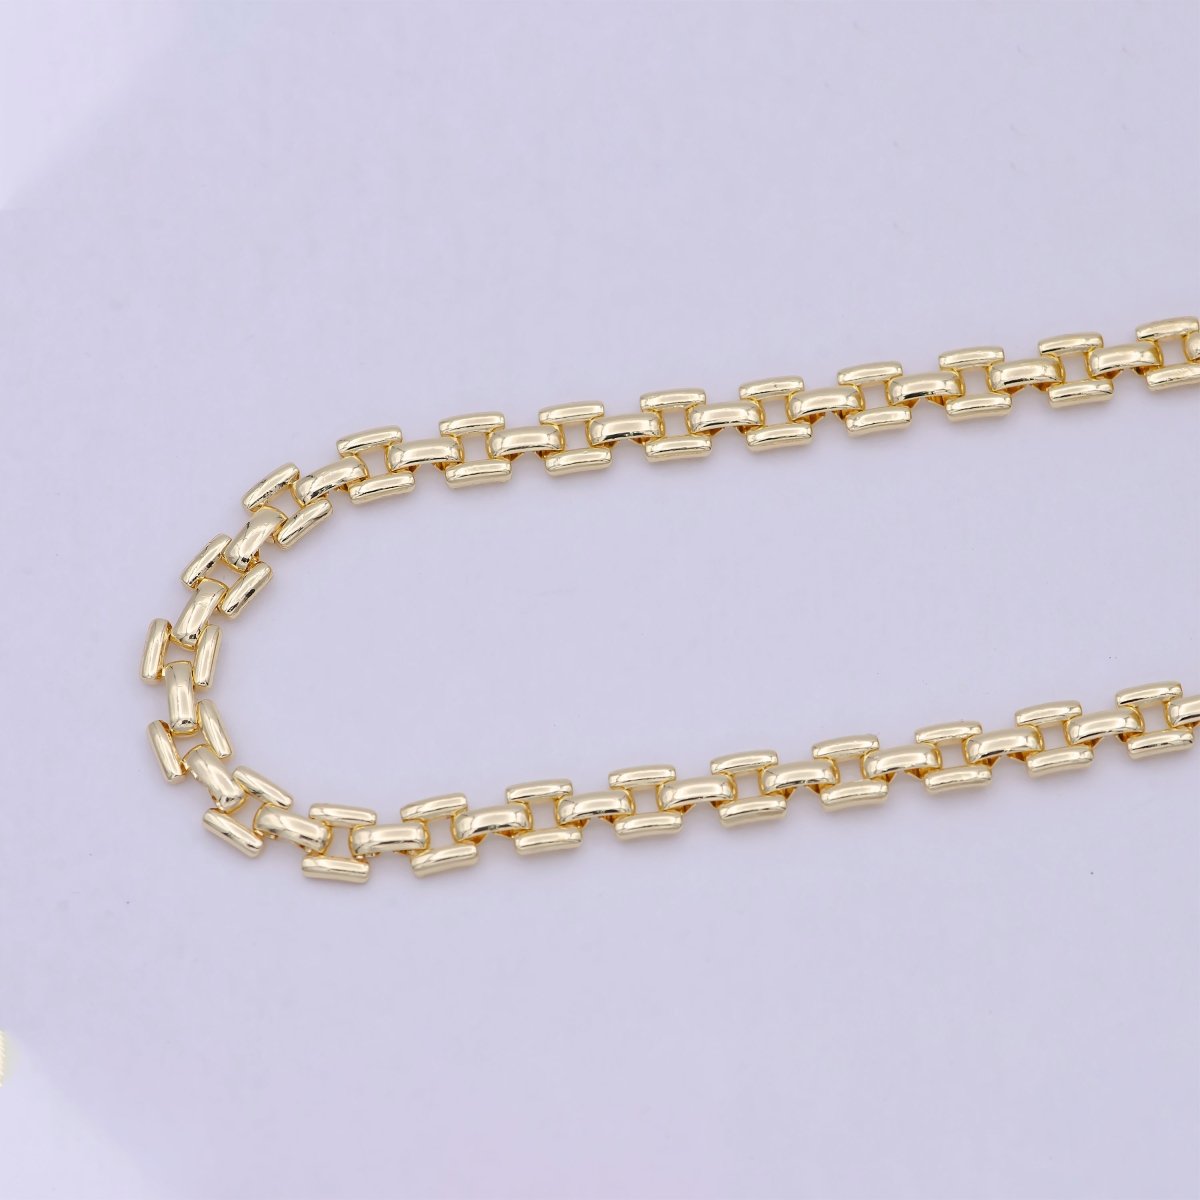 14K Gold Filled Panther Chain by Yard, 5.5mm Width Wholesale Bulk Panther Link For Jewelry Making | ROLL-706 Clearance Pricing - DLUXCA